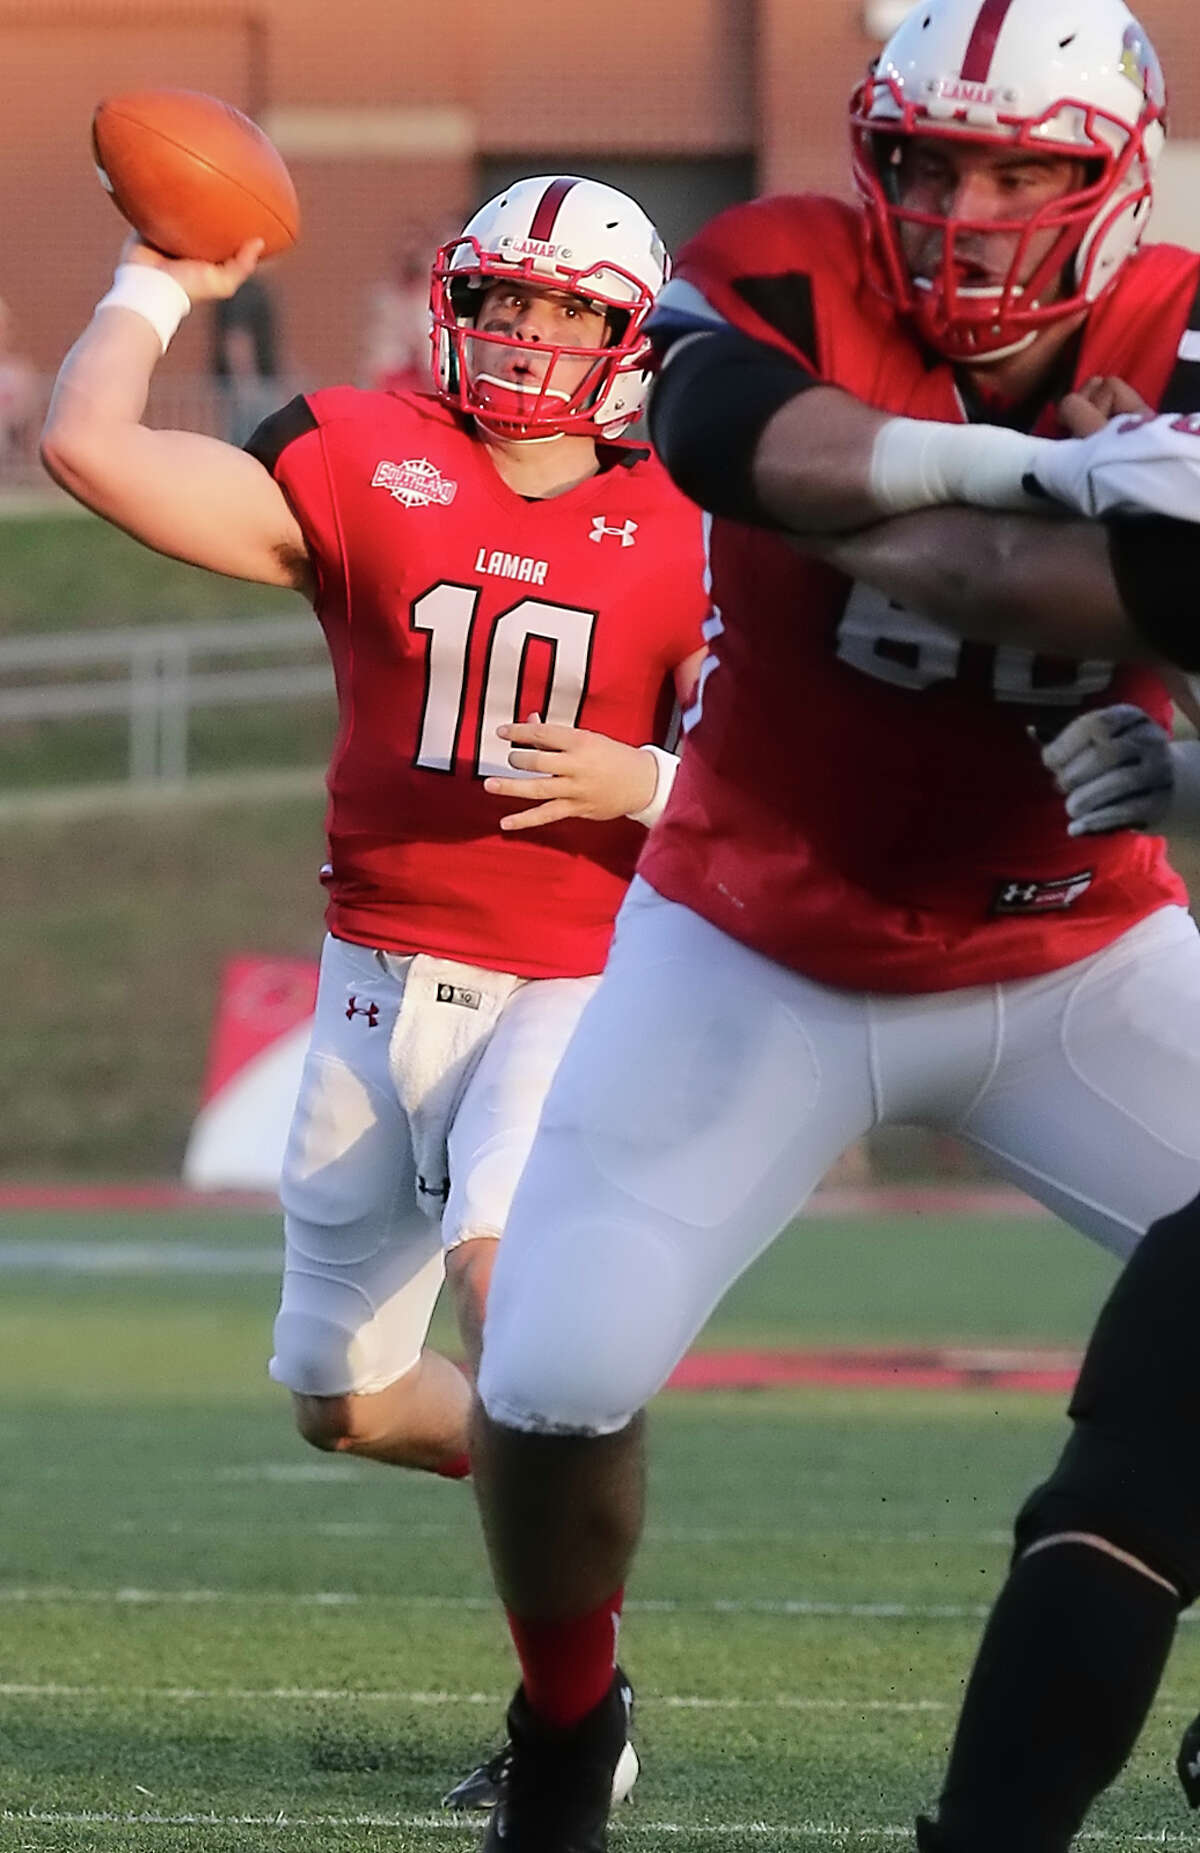 Sept. 5, vs. Bacone College: 66-3 W Joe Mindon, 10, passes the ball during the game between the Lamar Cardinals and Bacone College at Provost Umphrey Stadium Saturday night, September 5th, 2015 - photo provided by Kyle Ezell